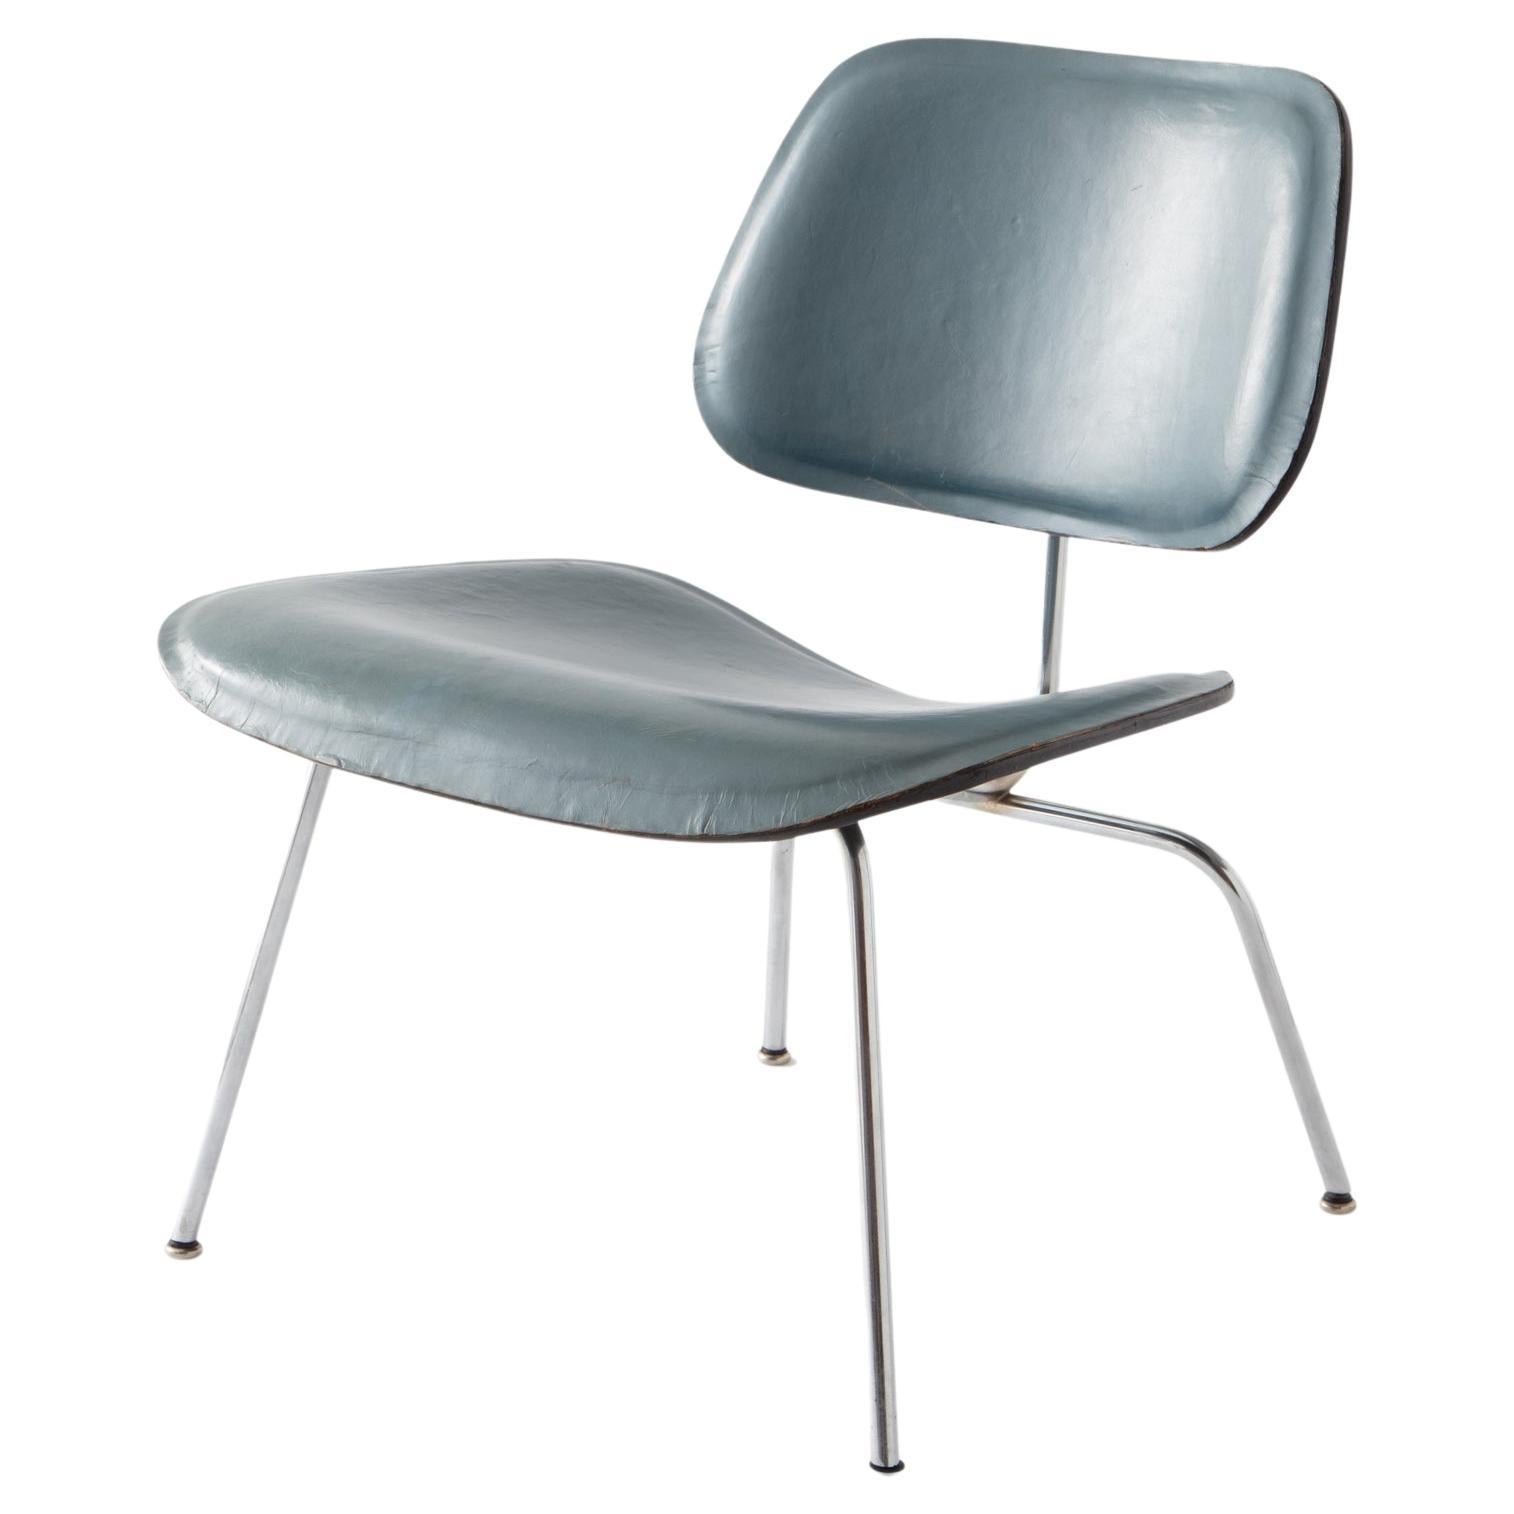 LCM 'Lounge Chair Metal' by Charles and Ray Eames